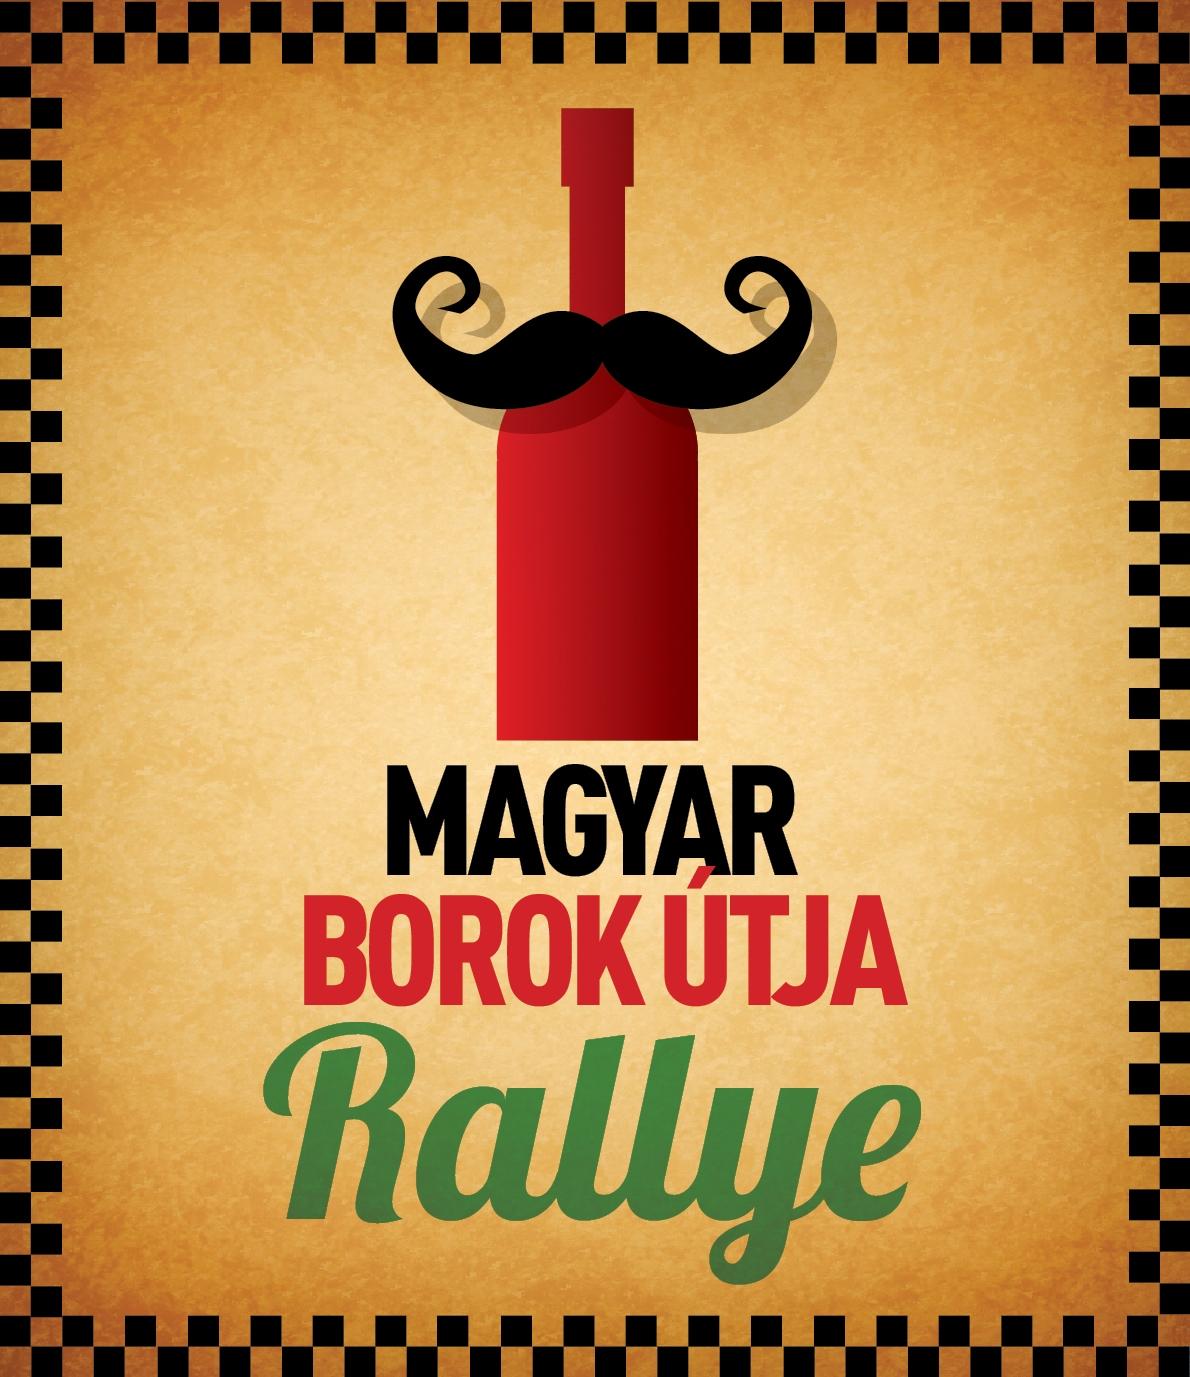 XVII. Road Of Hungarian Wines Rally, 24 August